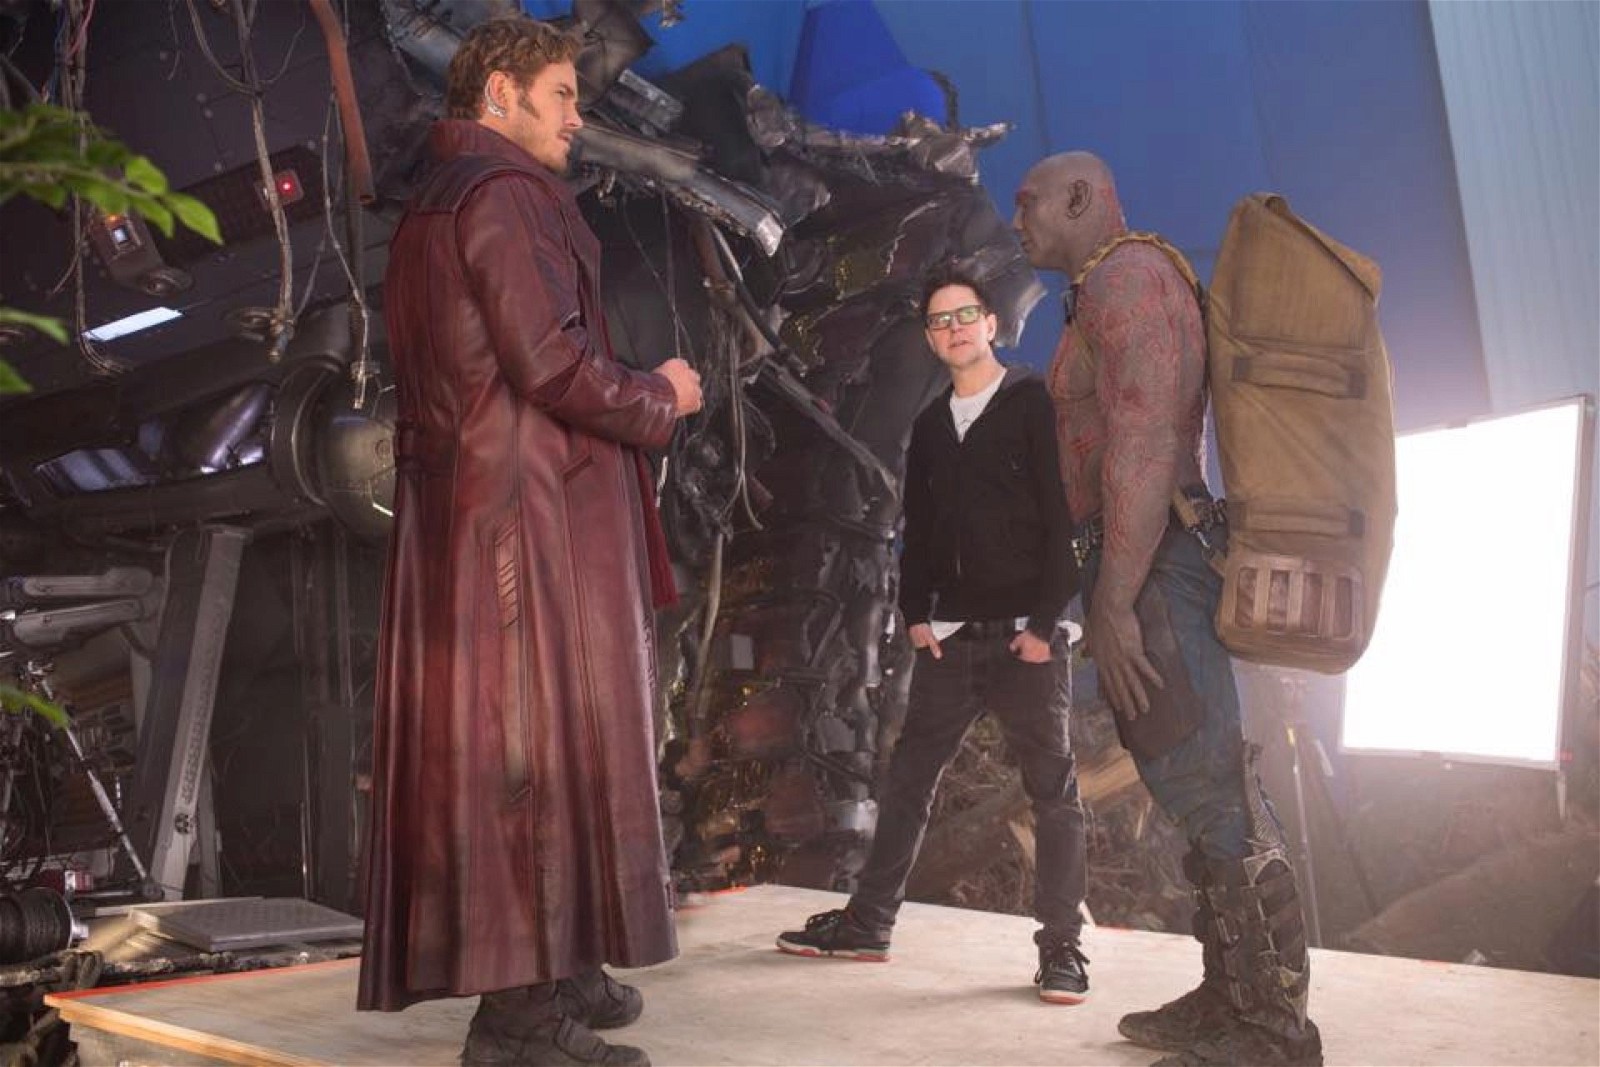 James Gunn on the set of Guardians of the Galaxy